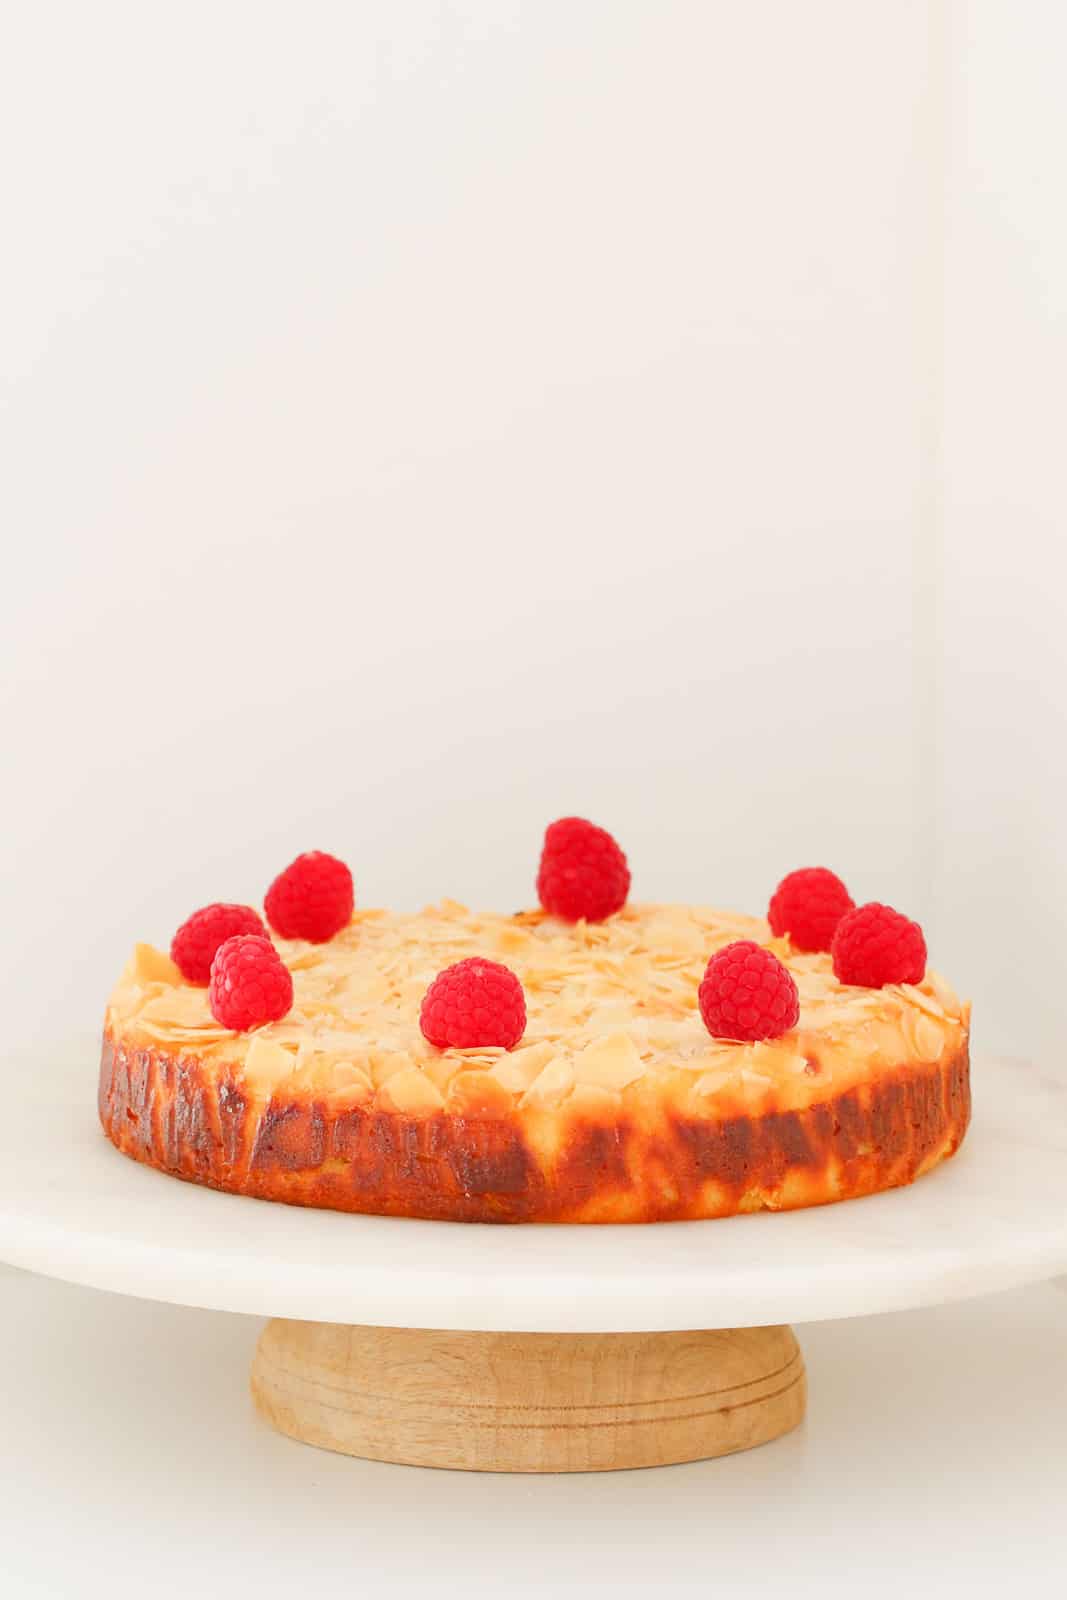 Lemon & Ricotta cake decorated with raspberries on a white cake stand